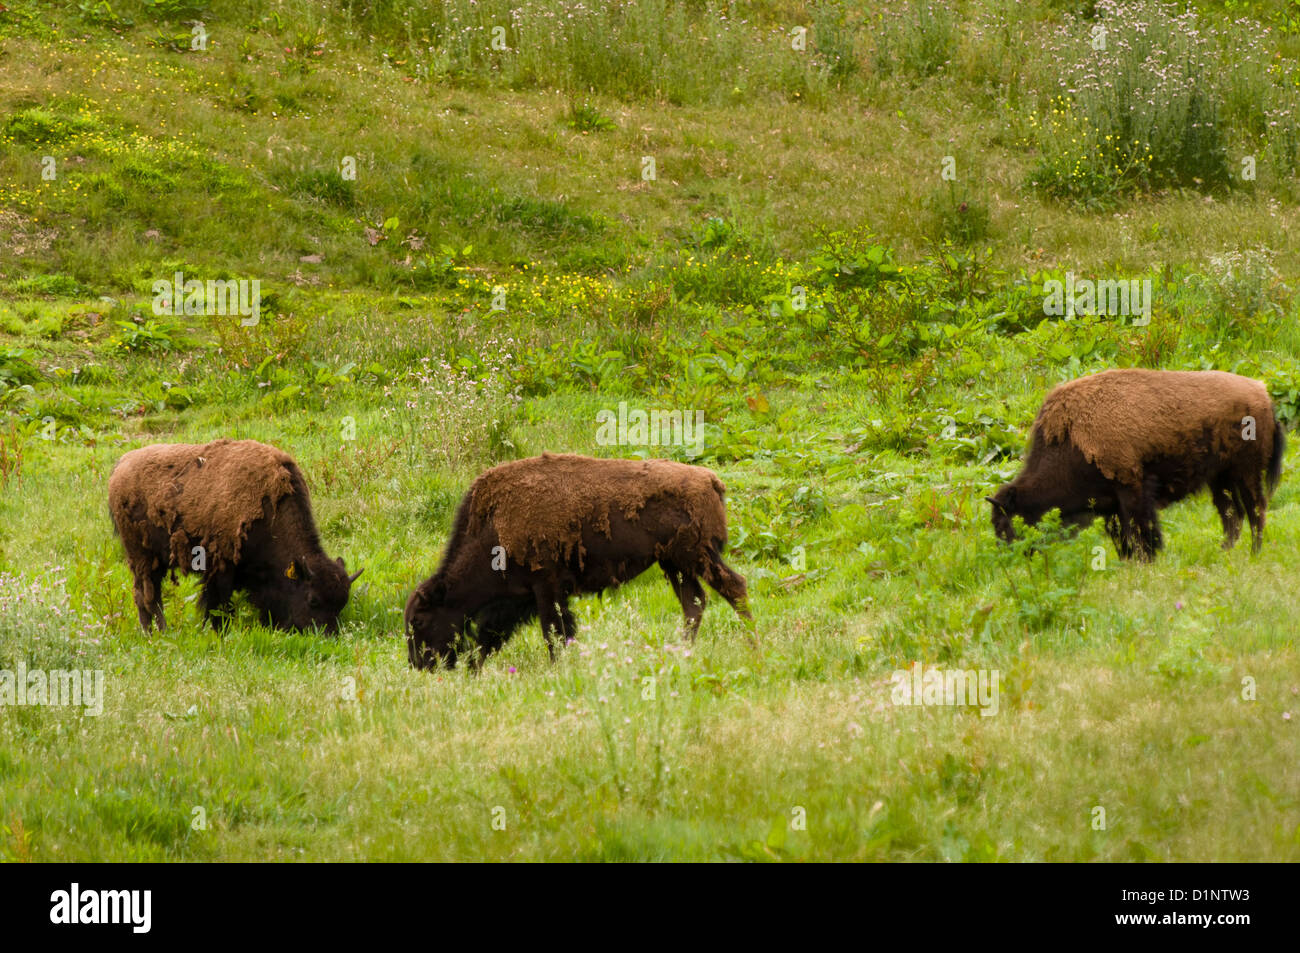 Bison in the Golden Gate Park Buffalo Paddock, San Francisco Stock Photo -  Alamy